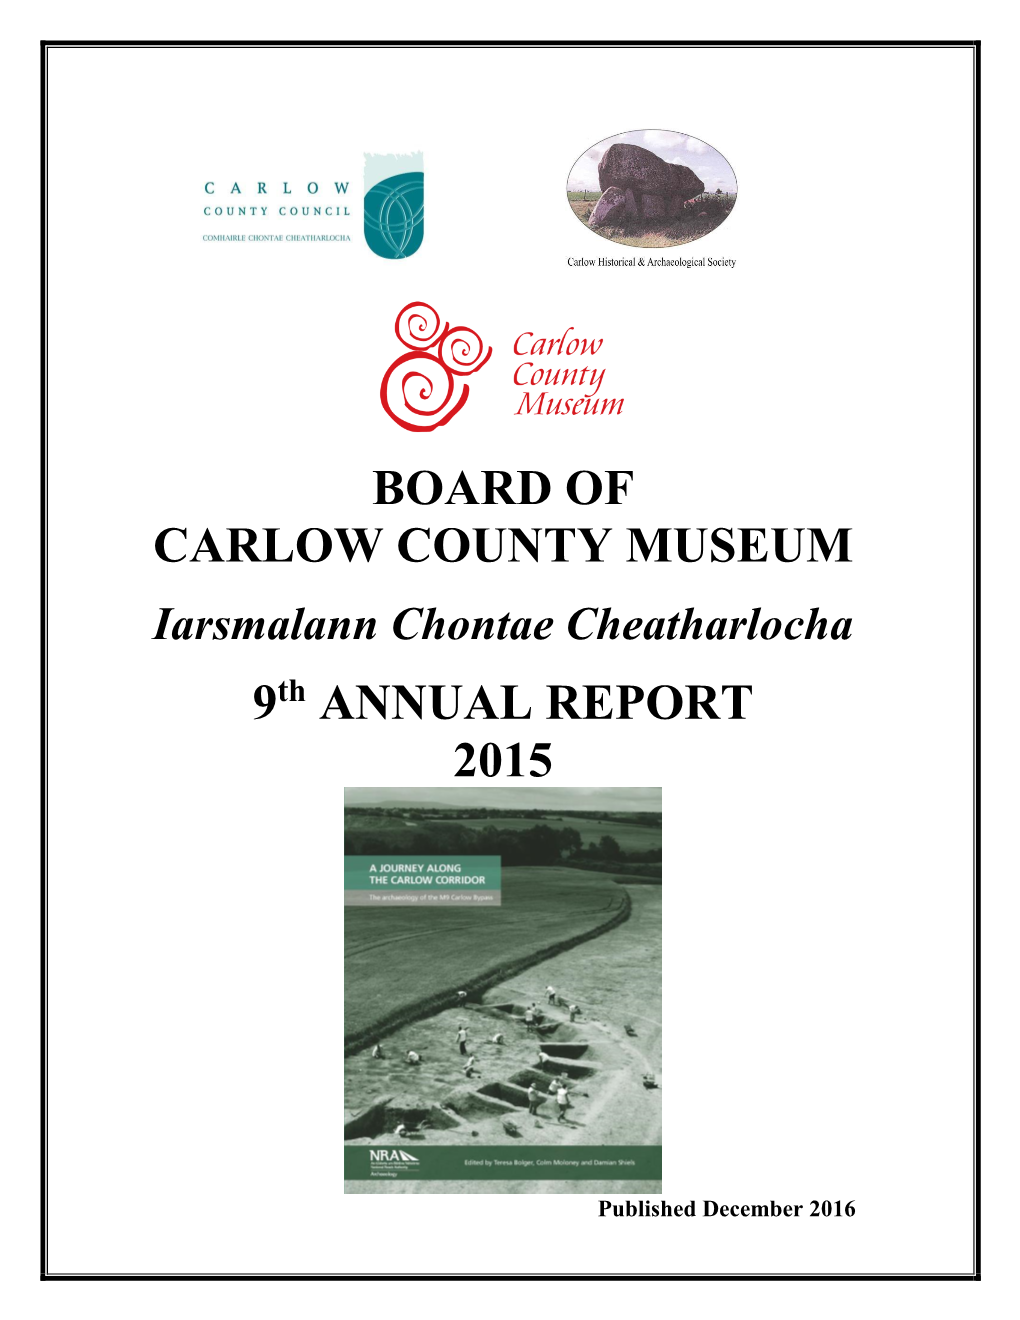 Board of Carlow County Museum 9 Annual Report 2015